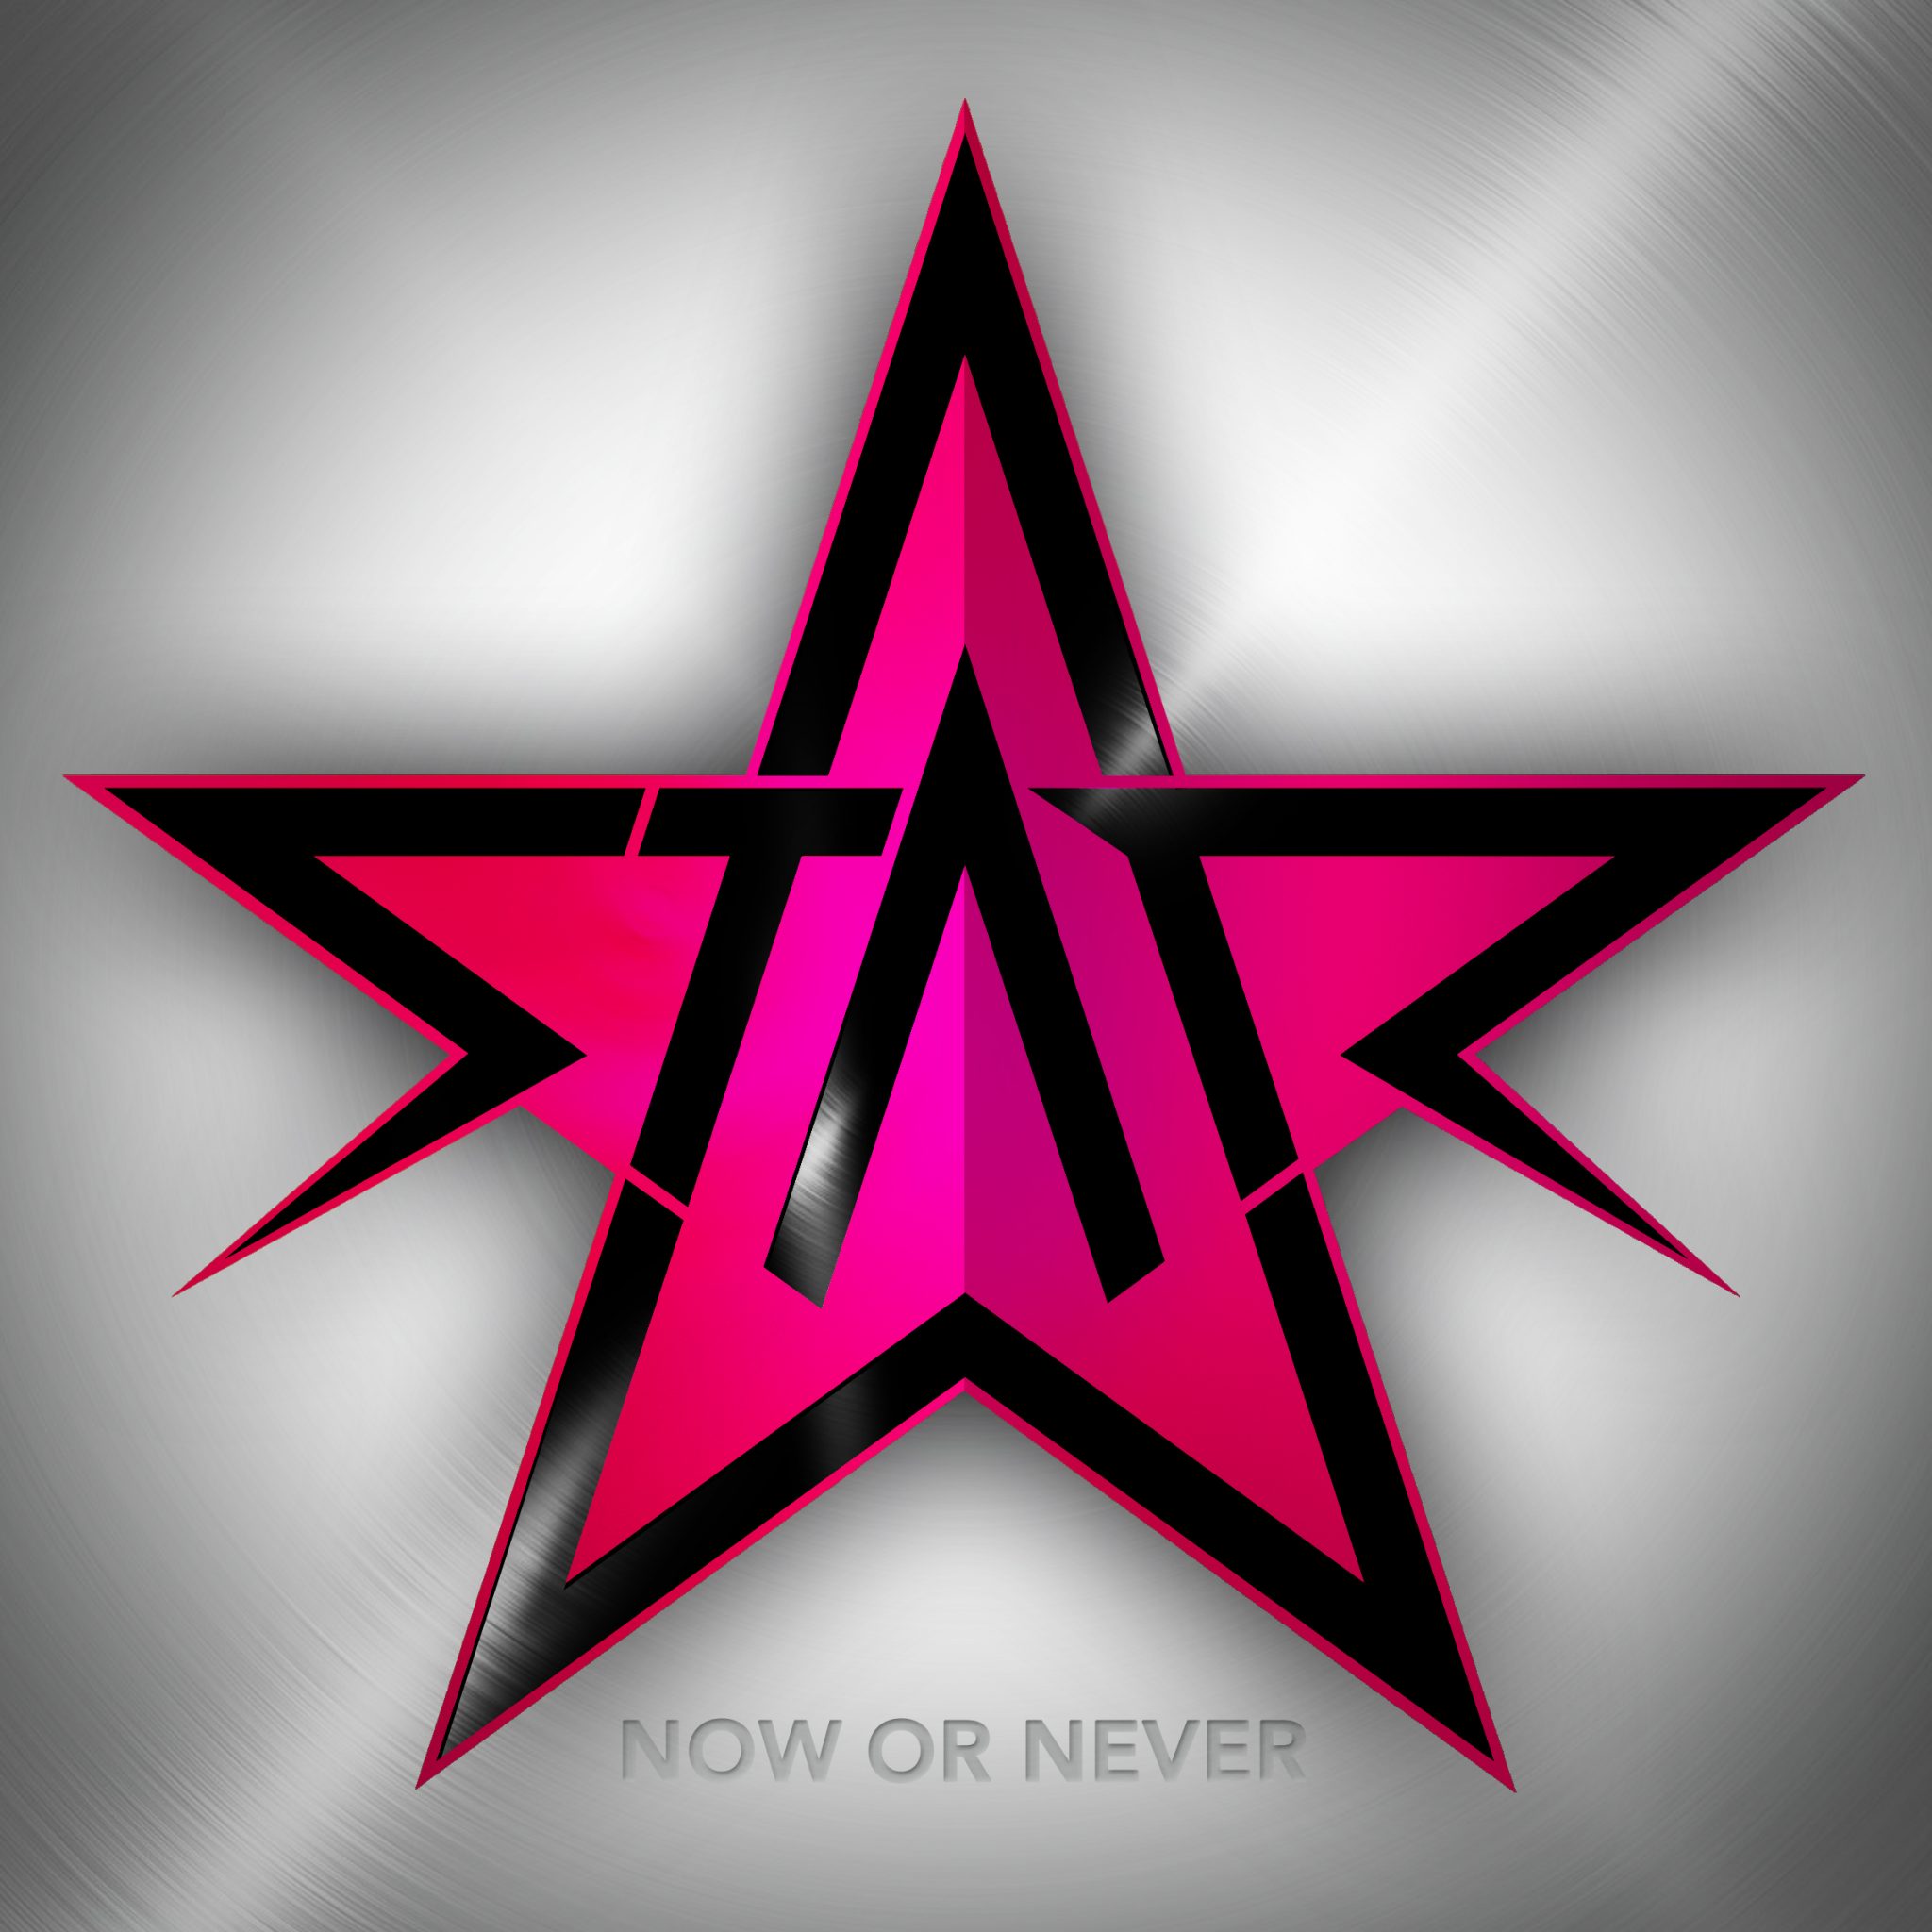 A*STAR - "Now Or Never"